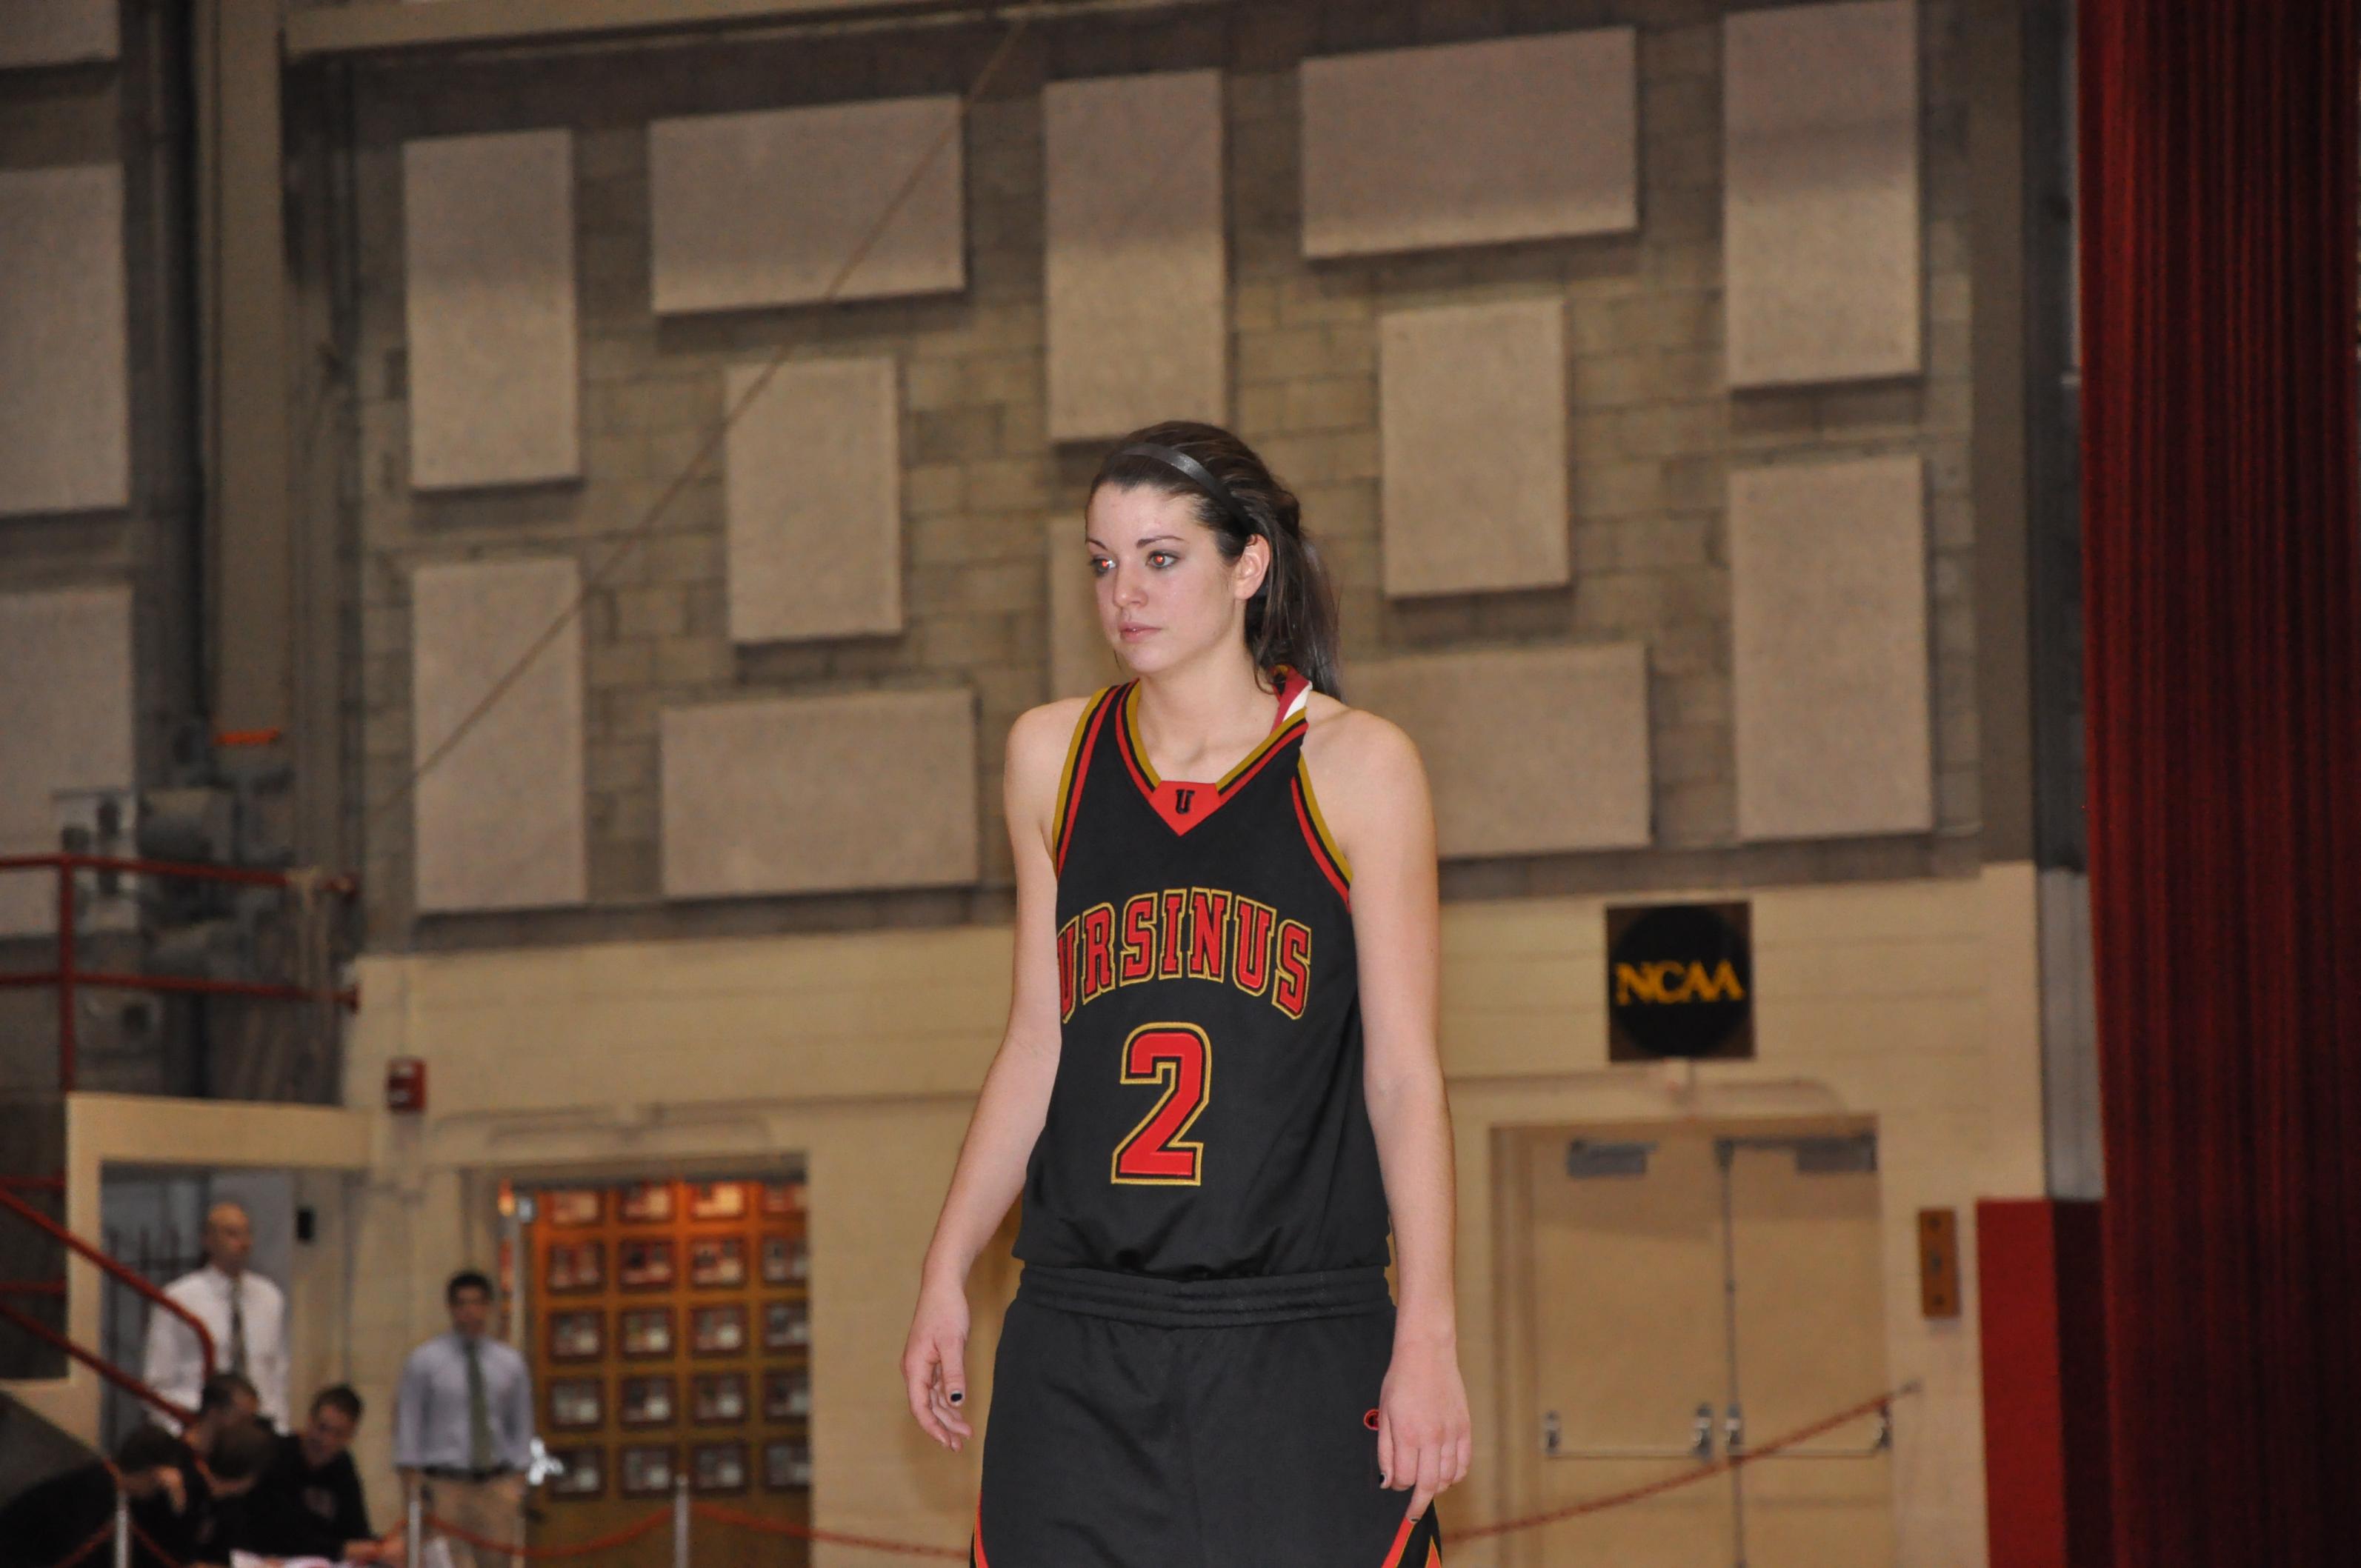 Women's Basketball ices Haverford, 67-51